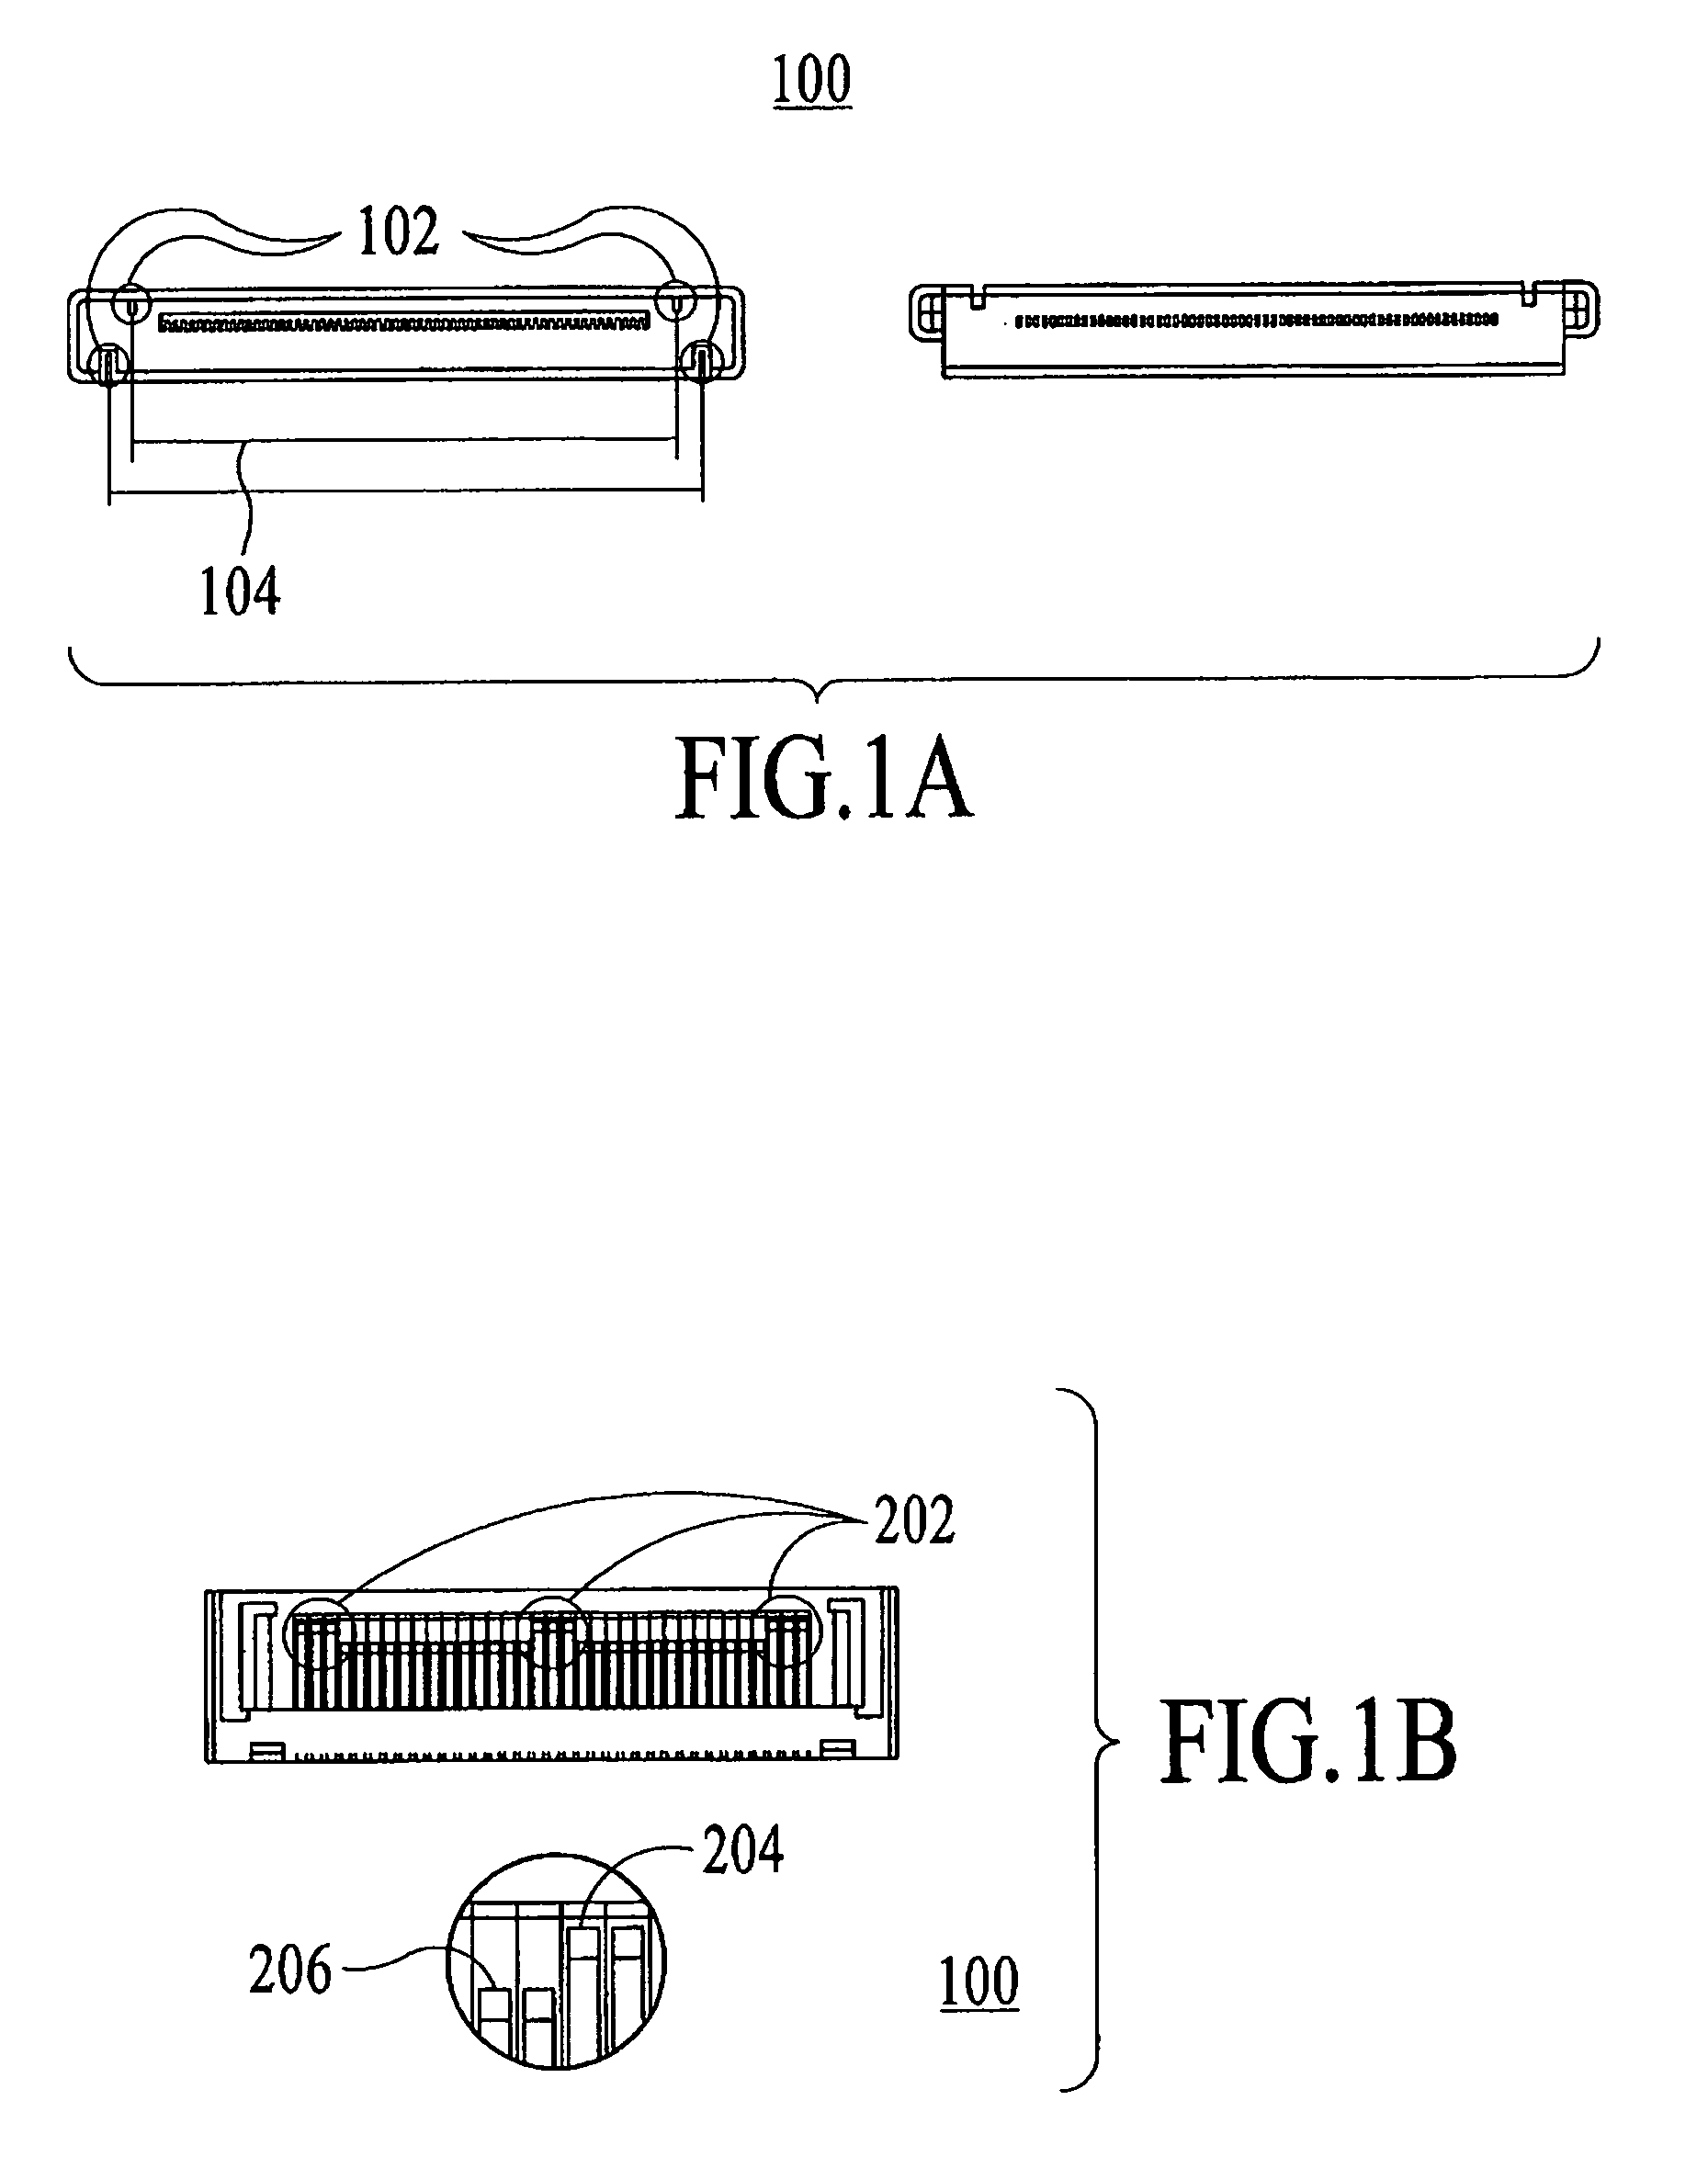 Method and system for transferring stored data between a media player and an accessory